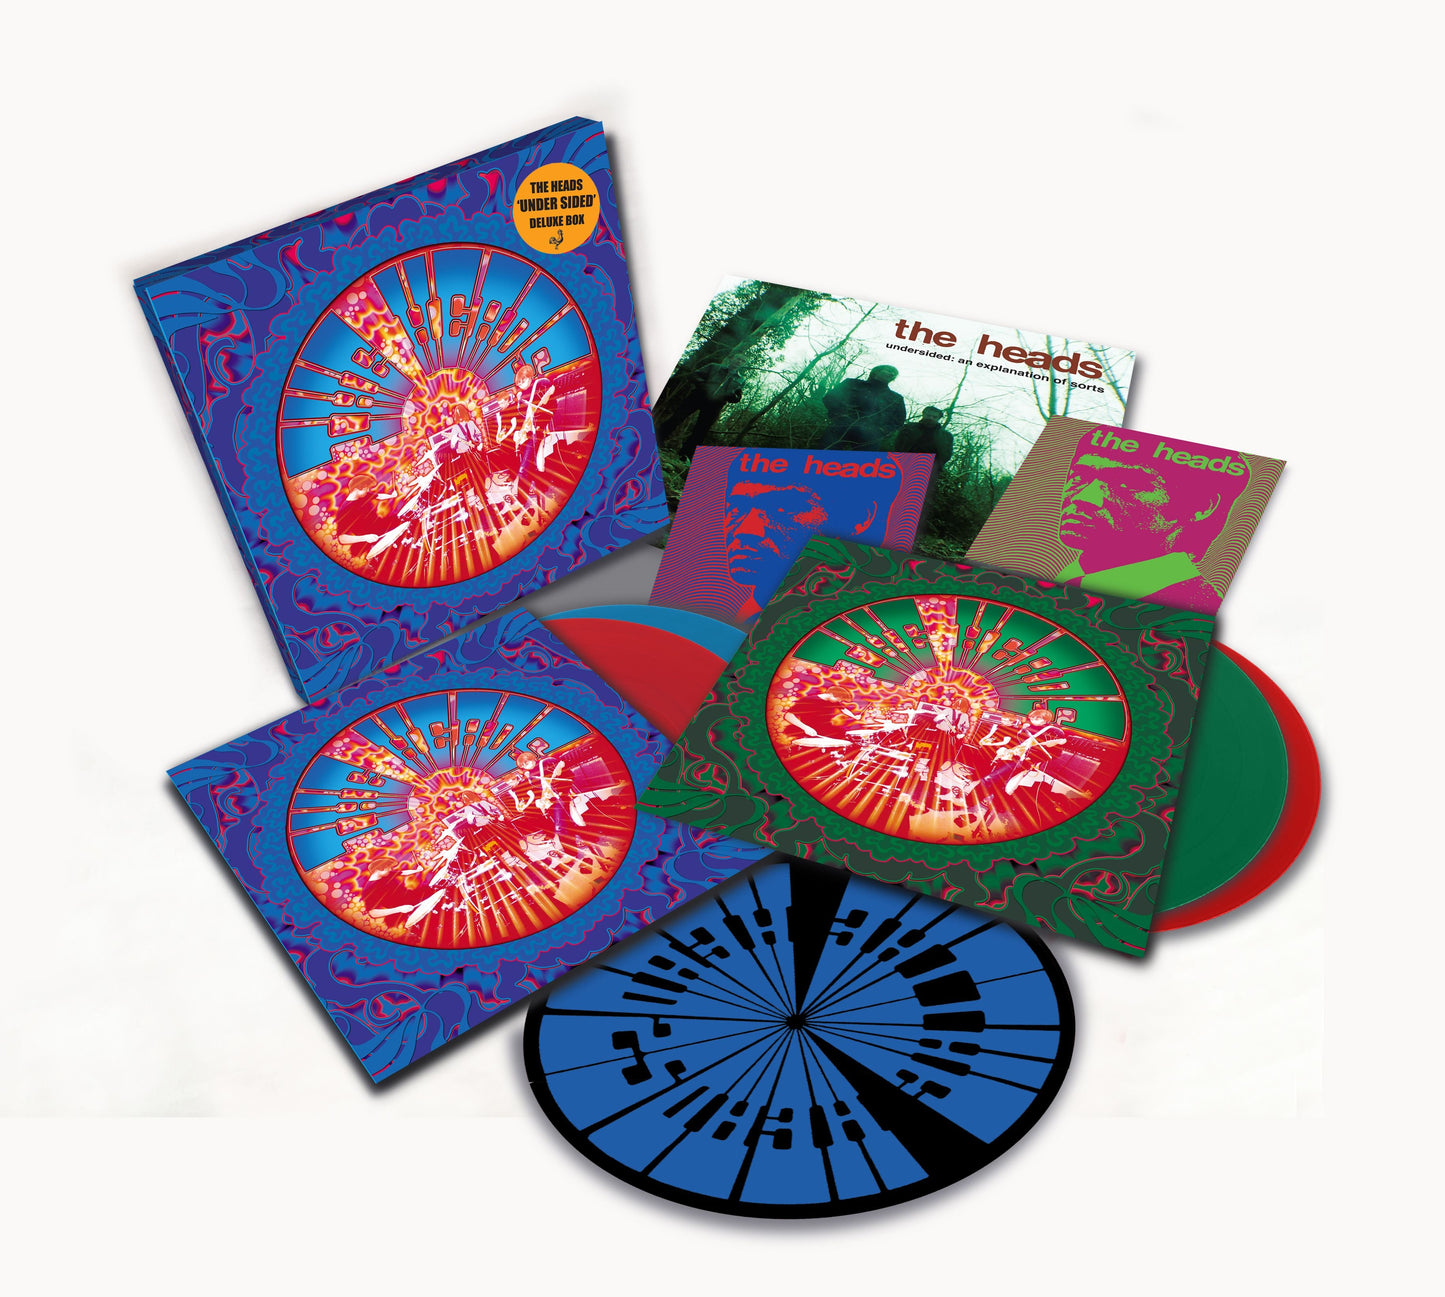 Arcade Sound - The Heads - Under Sided (20th Anniversary) - 2xLP / 4xLP Boxset / 2CD front cover